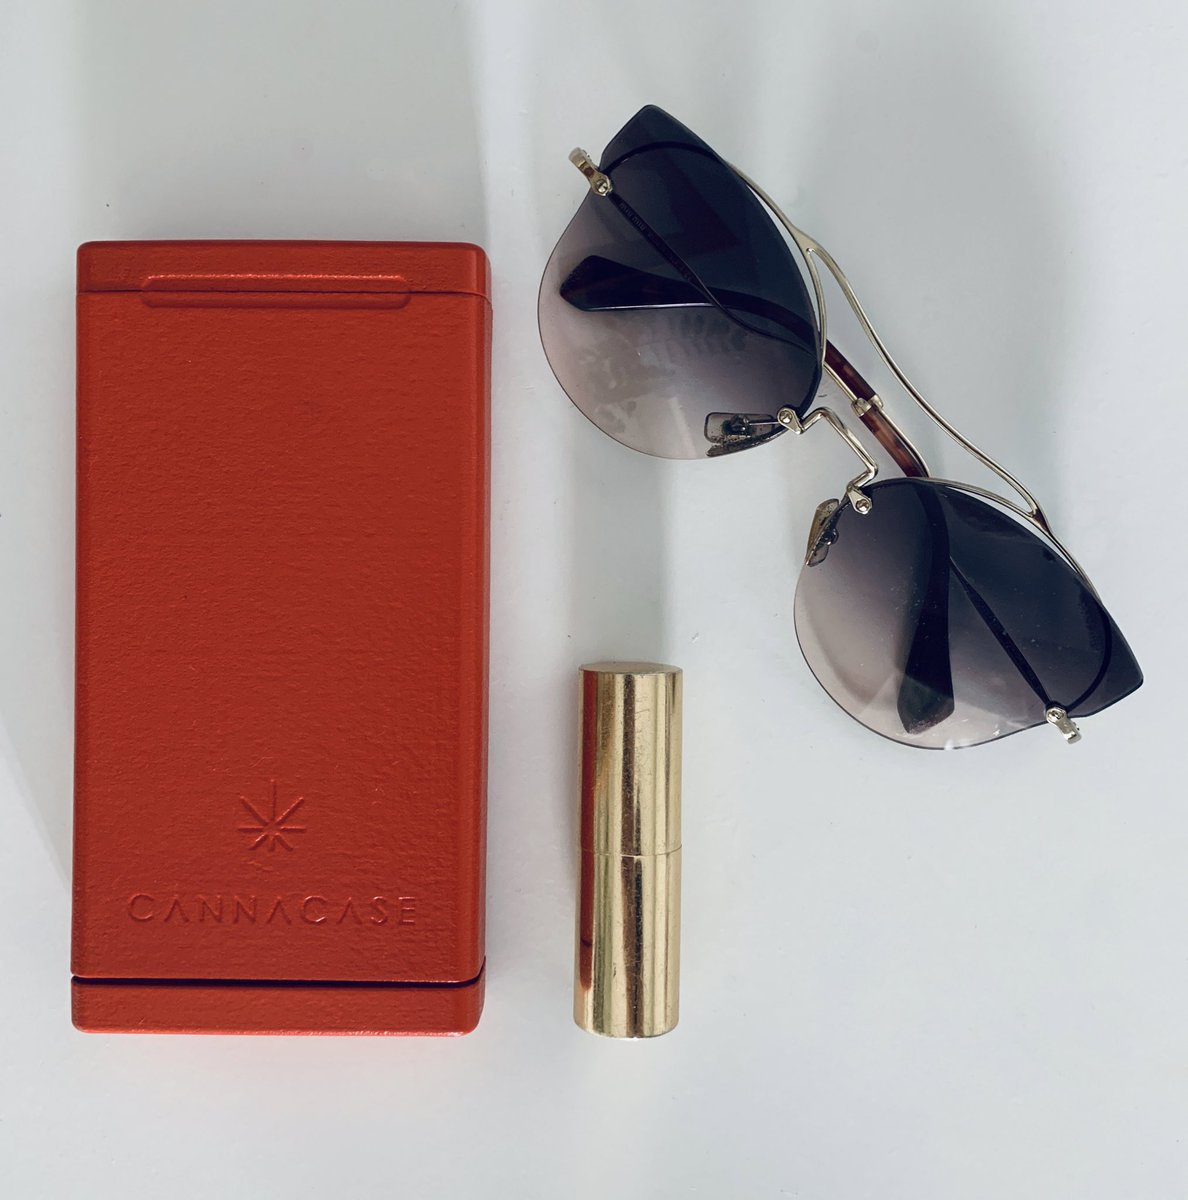 Every woman deserves to feel empowered and prepared throughout her day. Perfect for those who appreciate elegance and ease. 

#Empowerment #Style #Cannabis